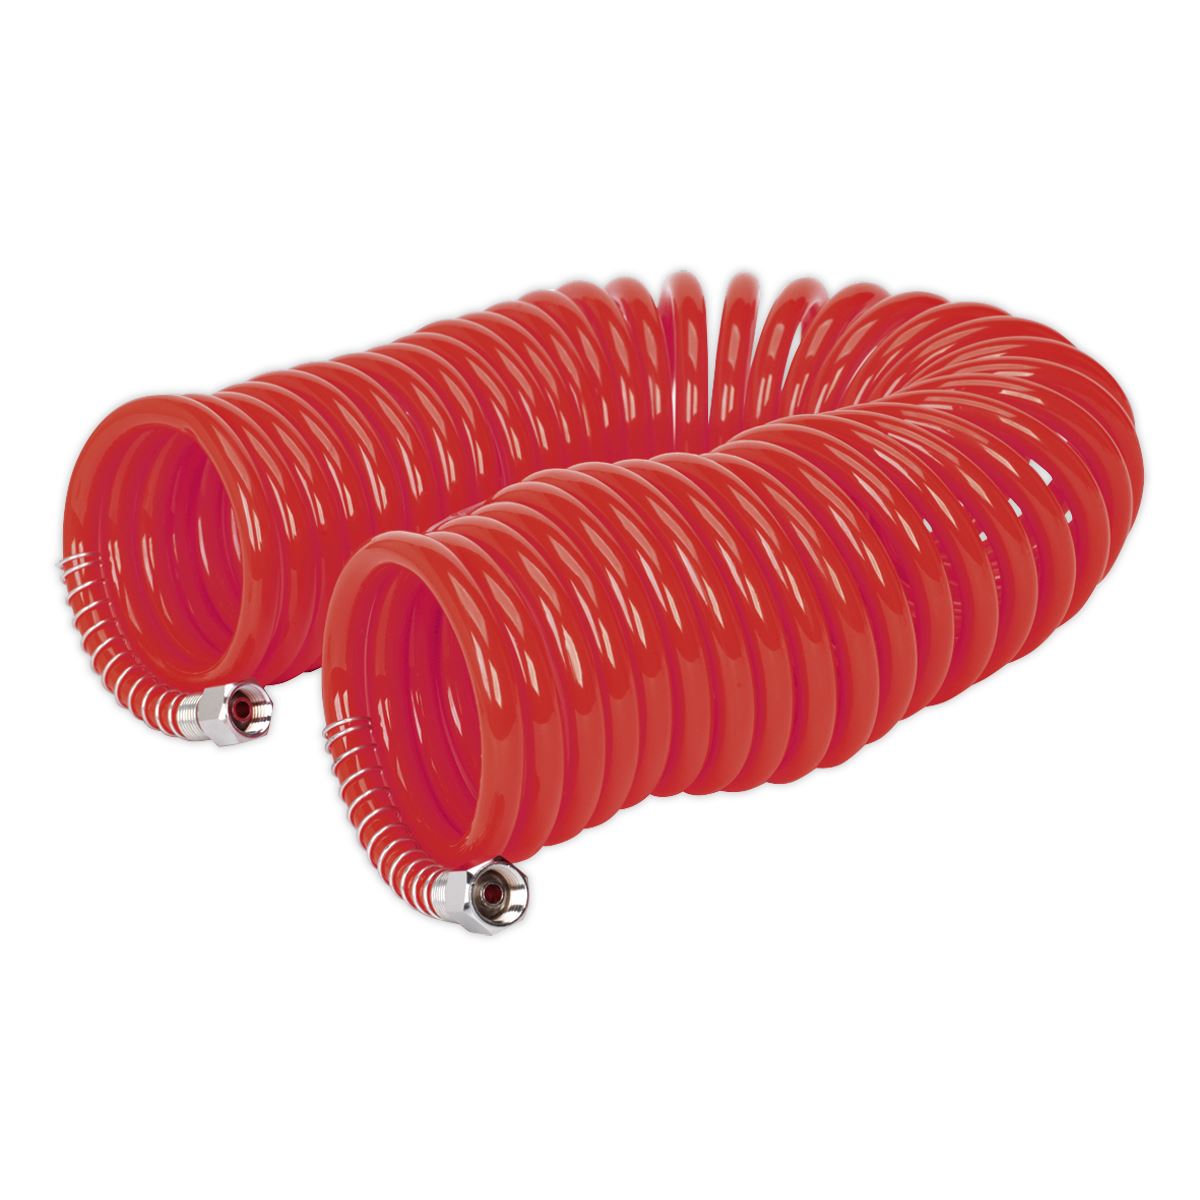 Sealey PU Coiled Air Hose 10m x Ø6mm with 1/4"BSP Unions